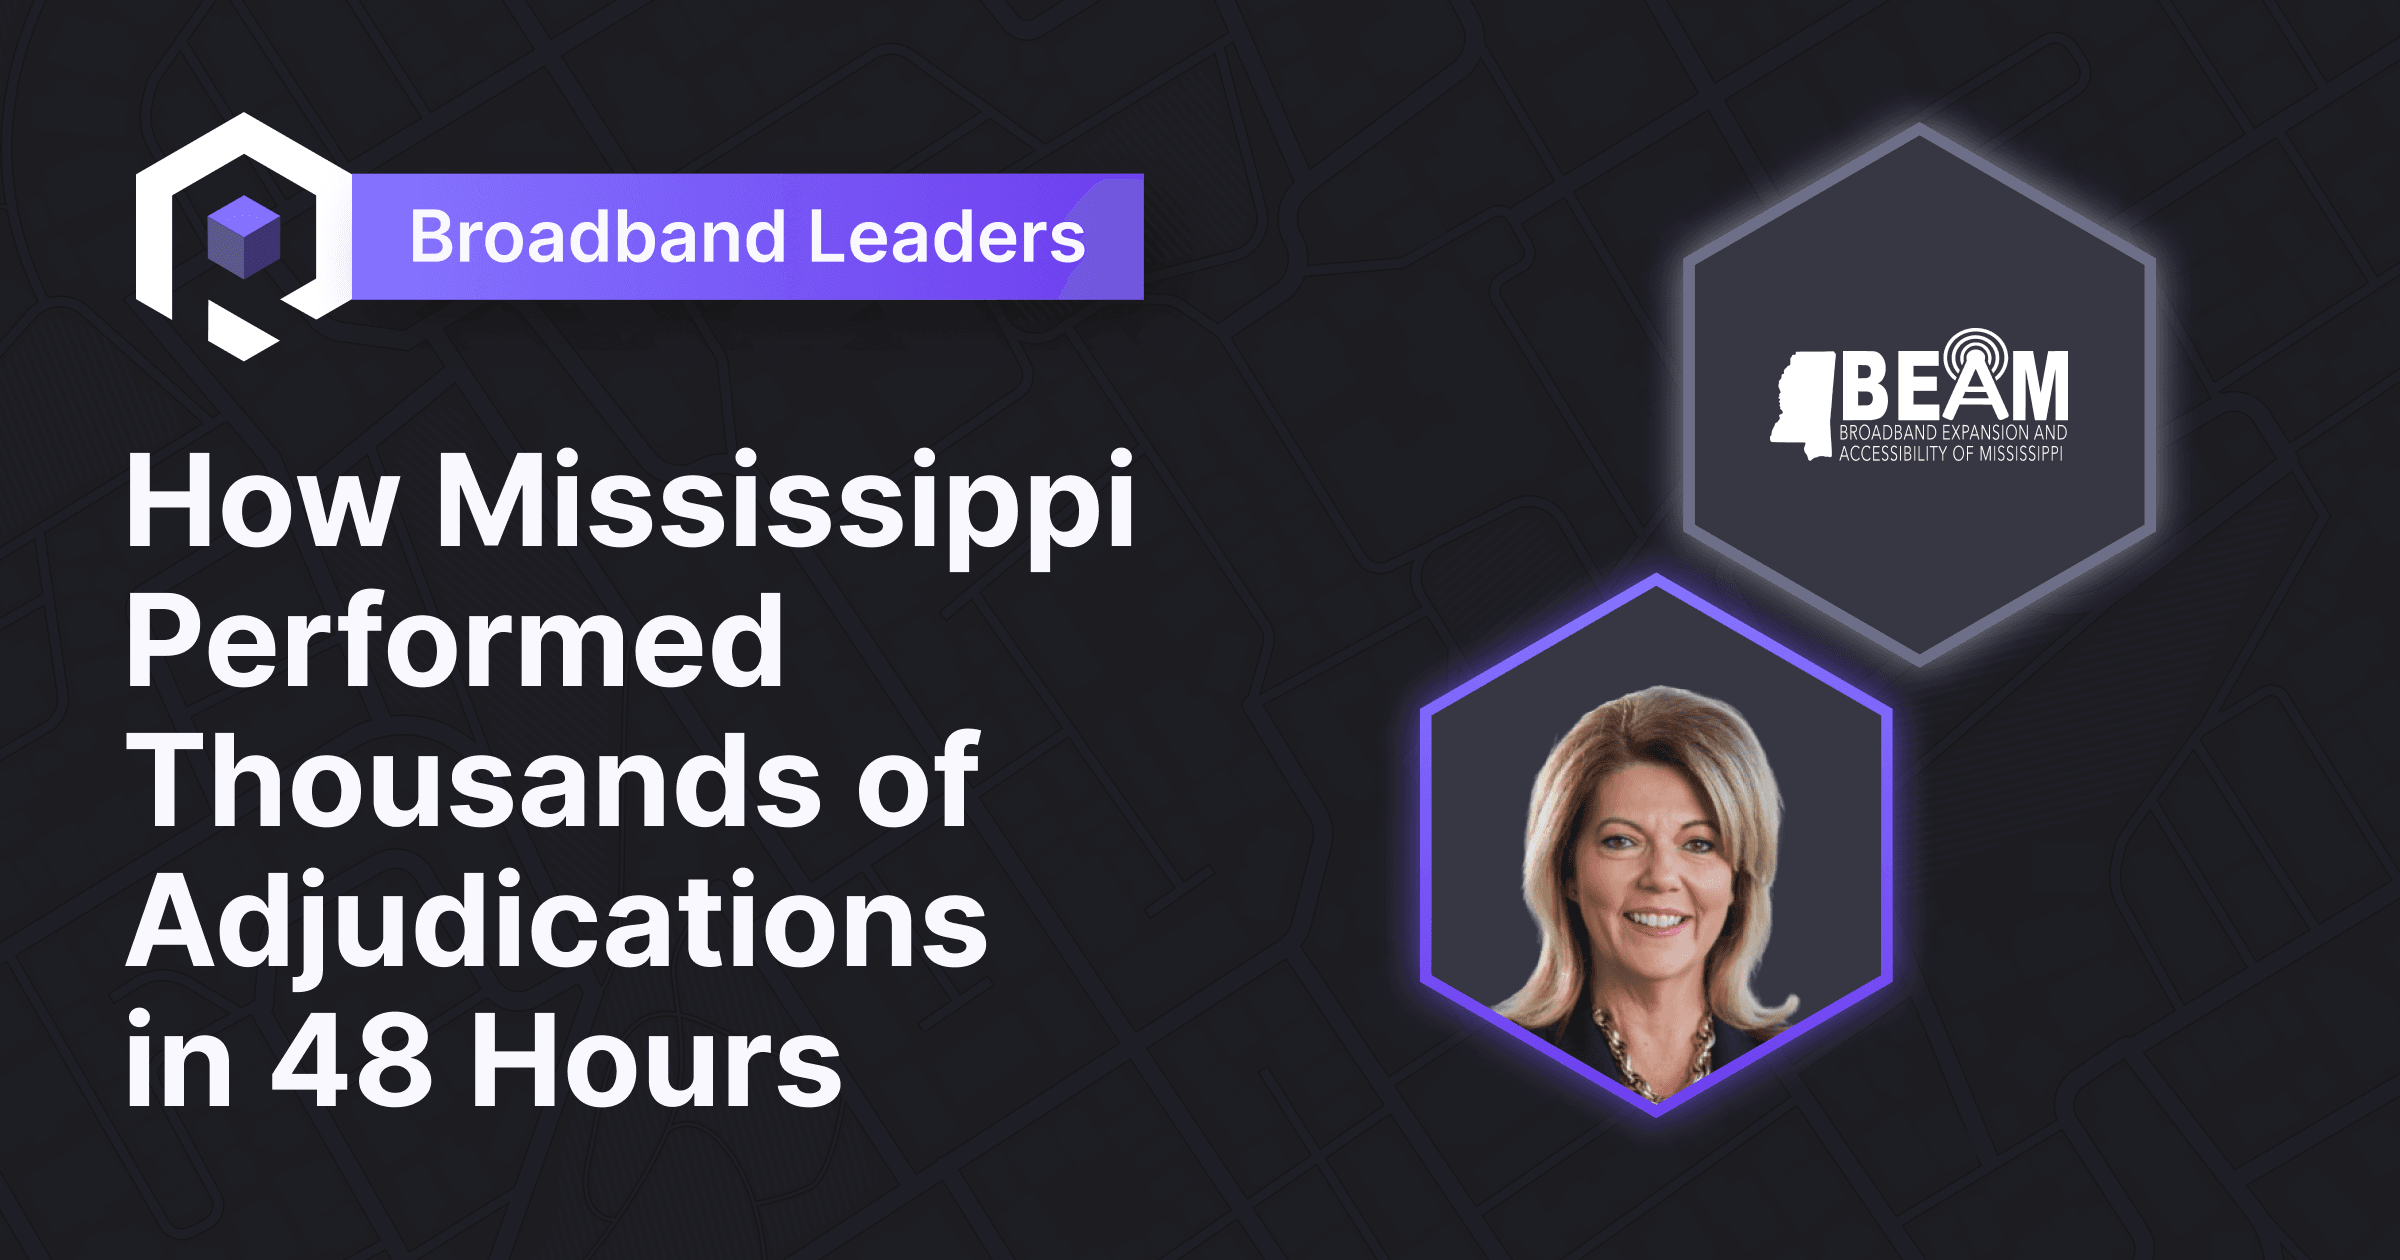 Making Broadband A Reality for Mississippians Banner Image